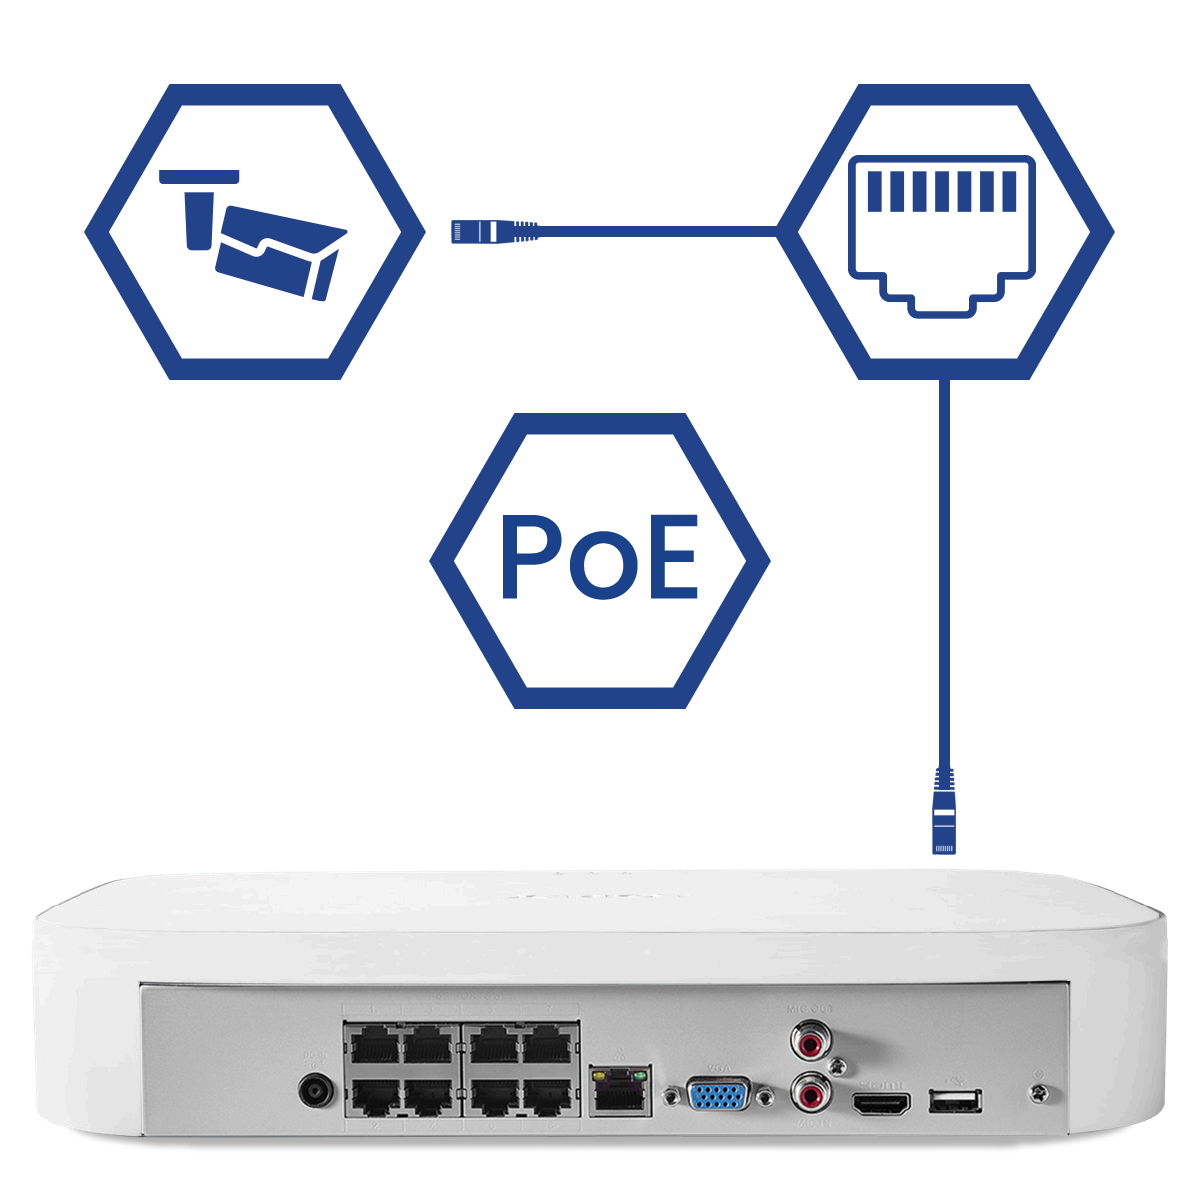 Plug-and-play simplicity with Power over Ethernet technology